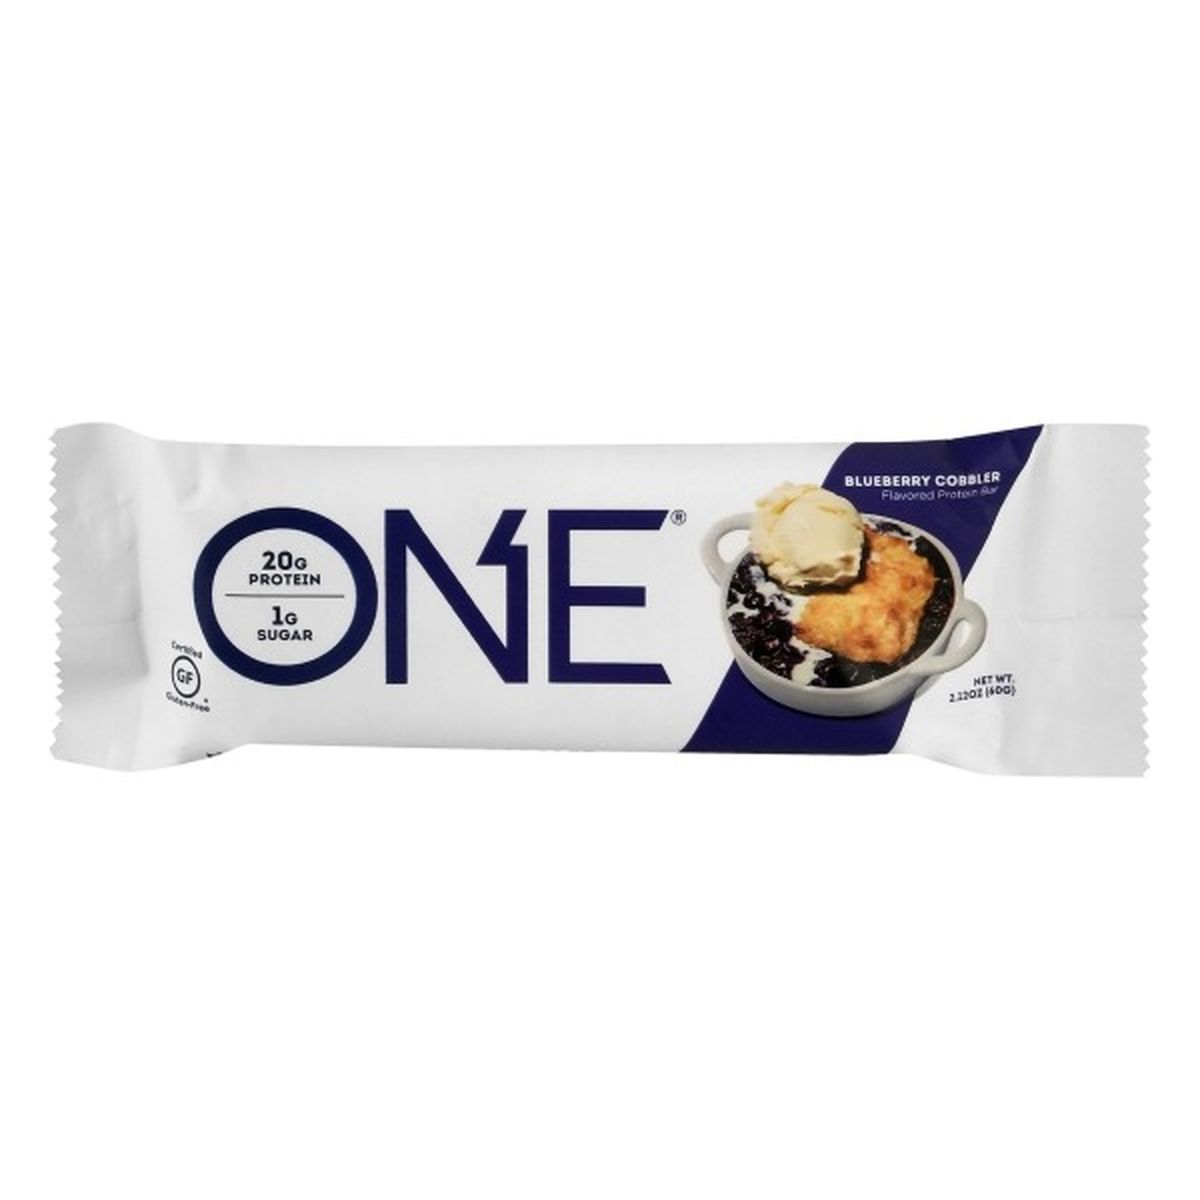 Calories in One Protein Bar, Blueberry Cobbler Flavored